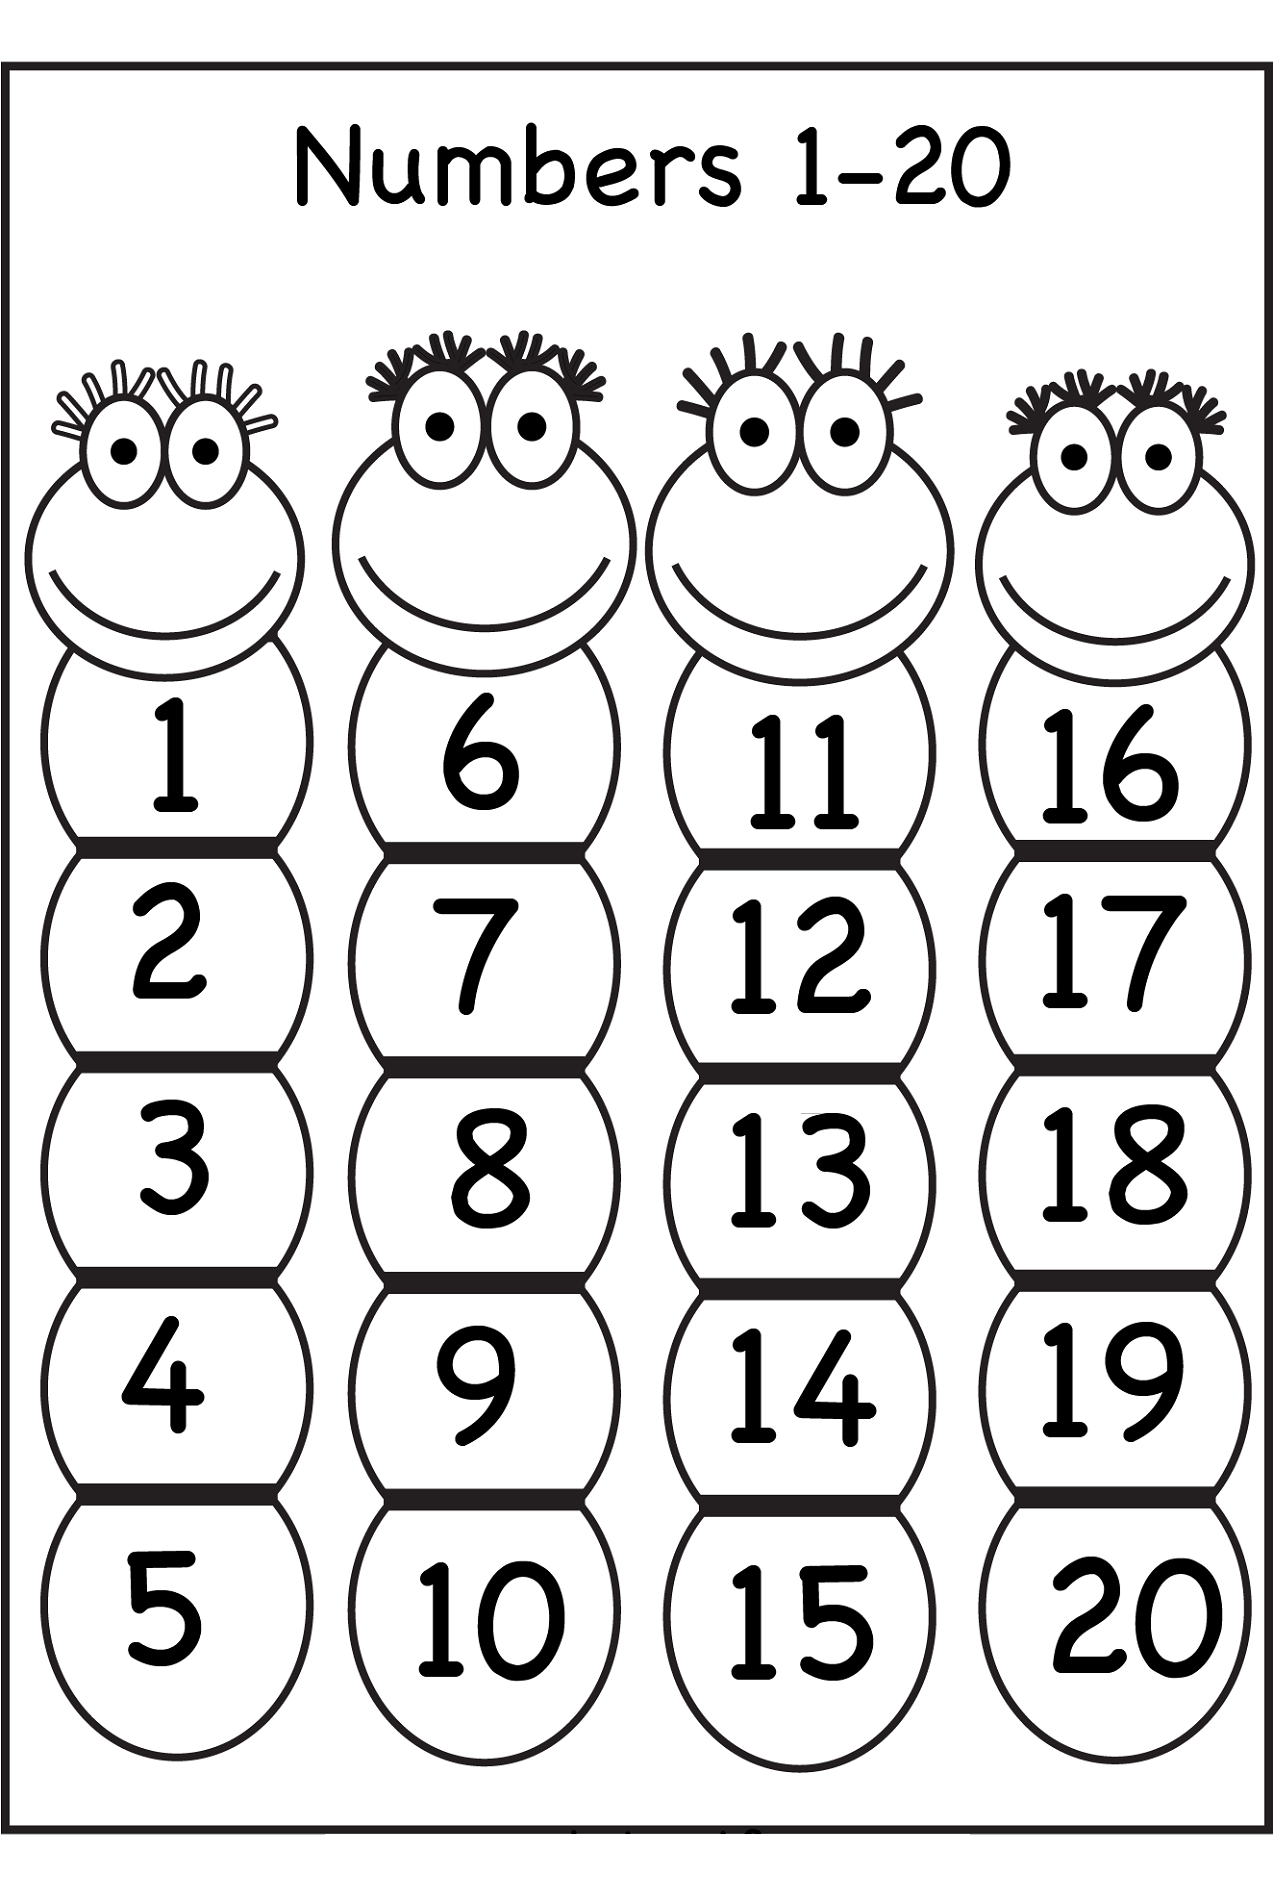 numbers-1-20-online-pdf-worksheet-free-printable-number-counting-worksheets-count-and-match